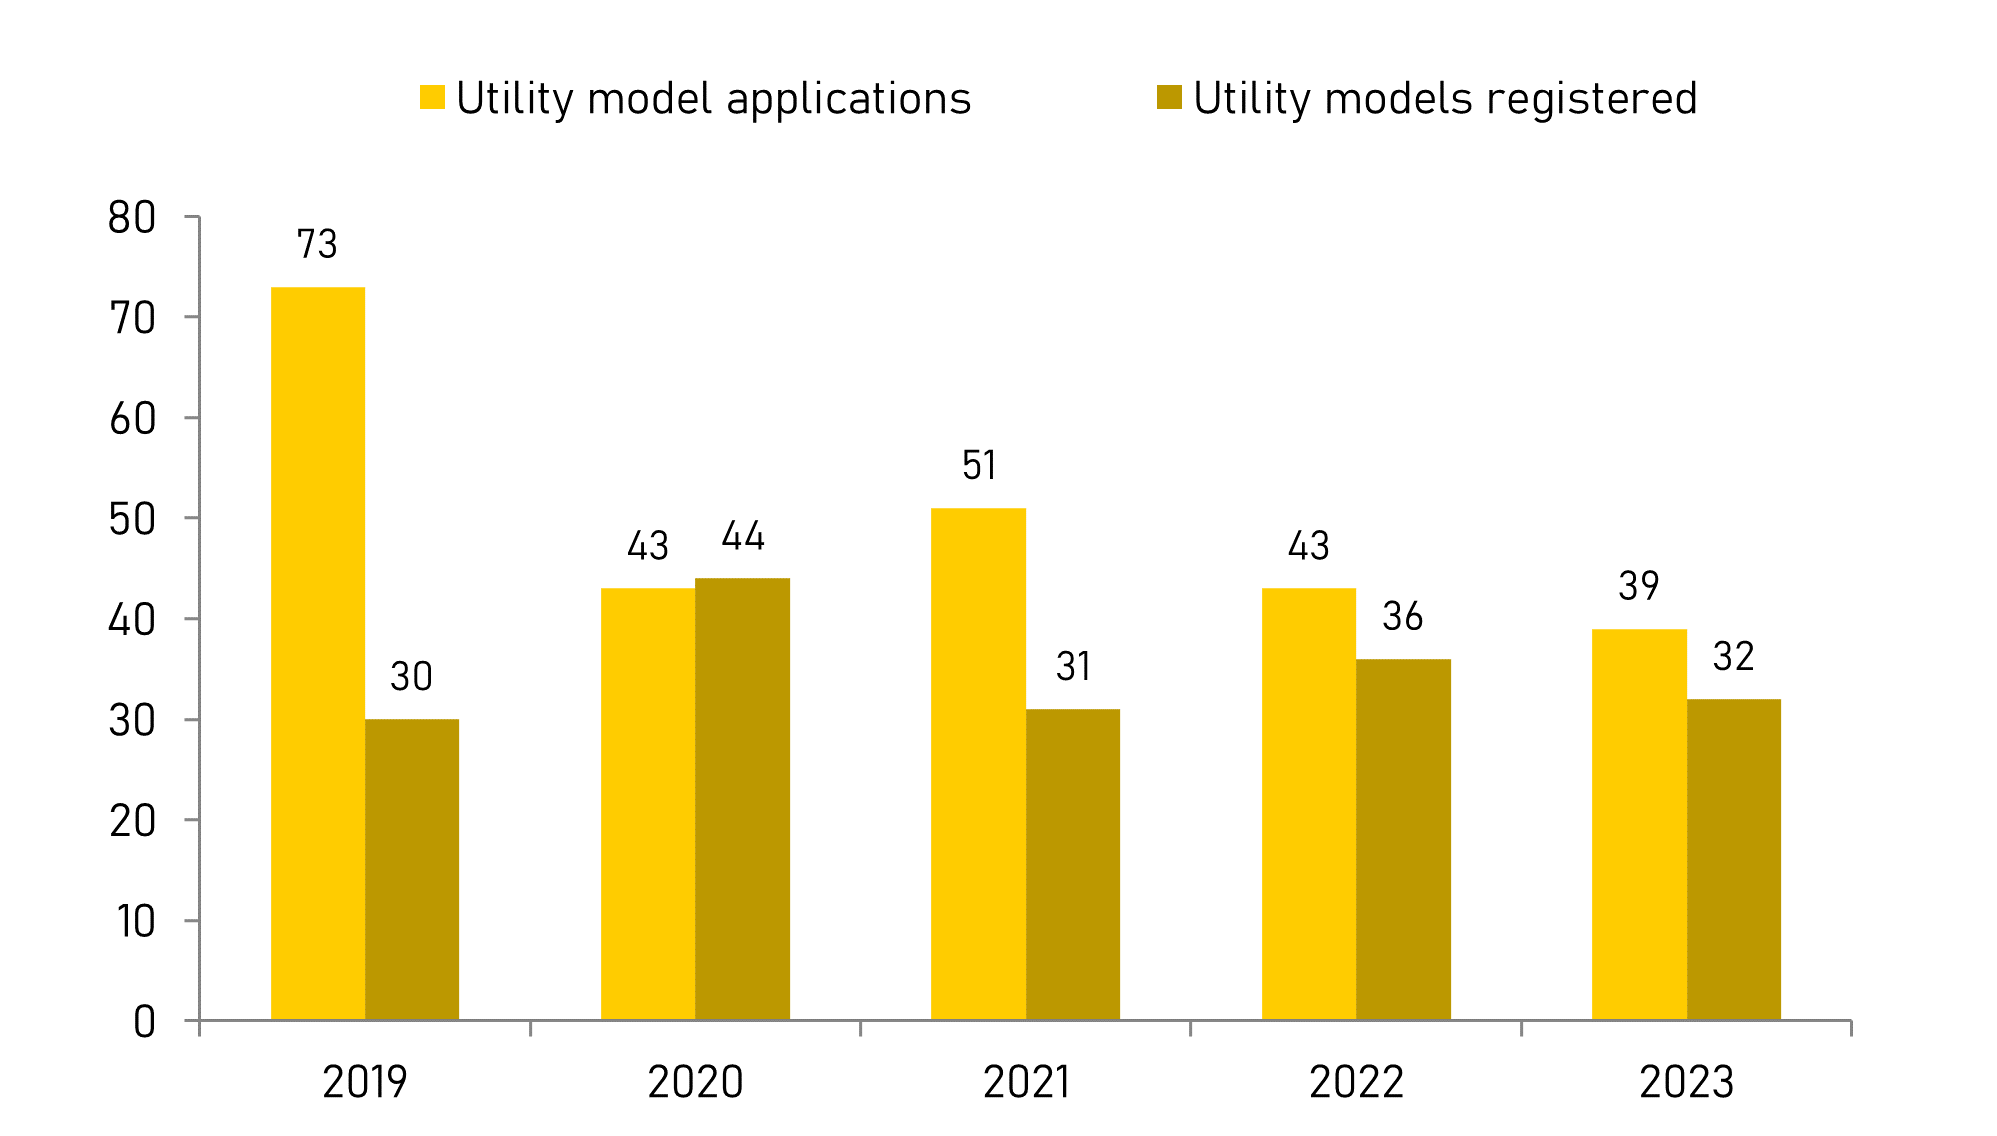 Number of utility model applications filed and utility models registered in 2019-2023